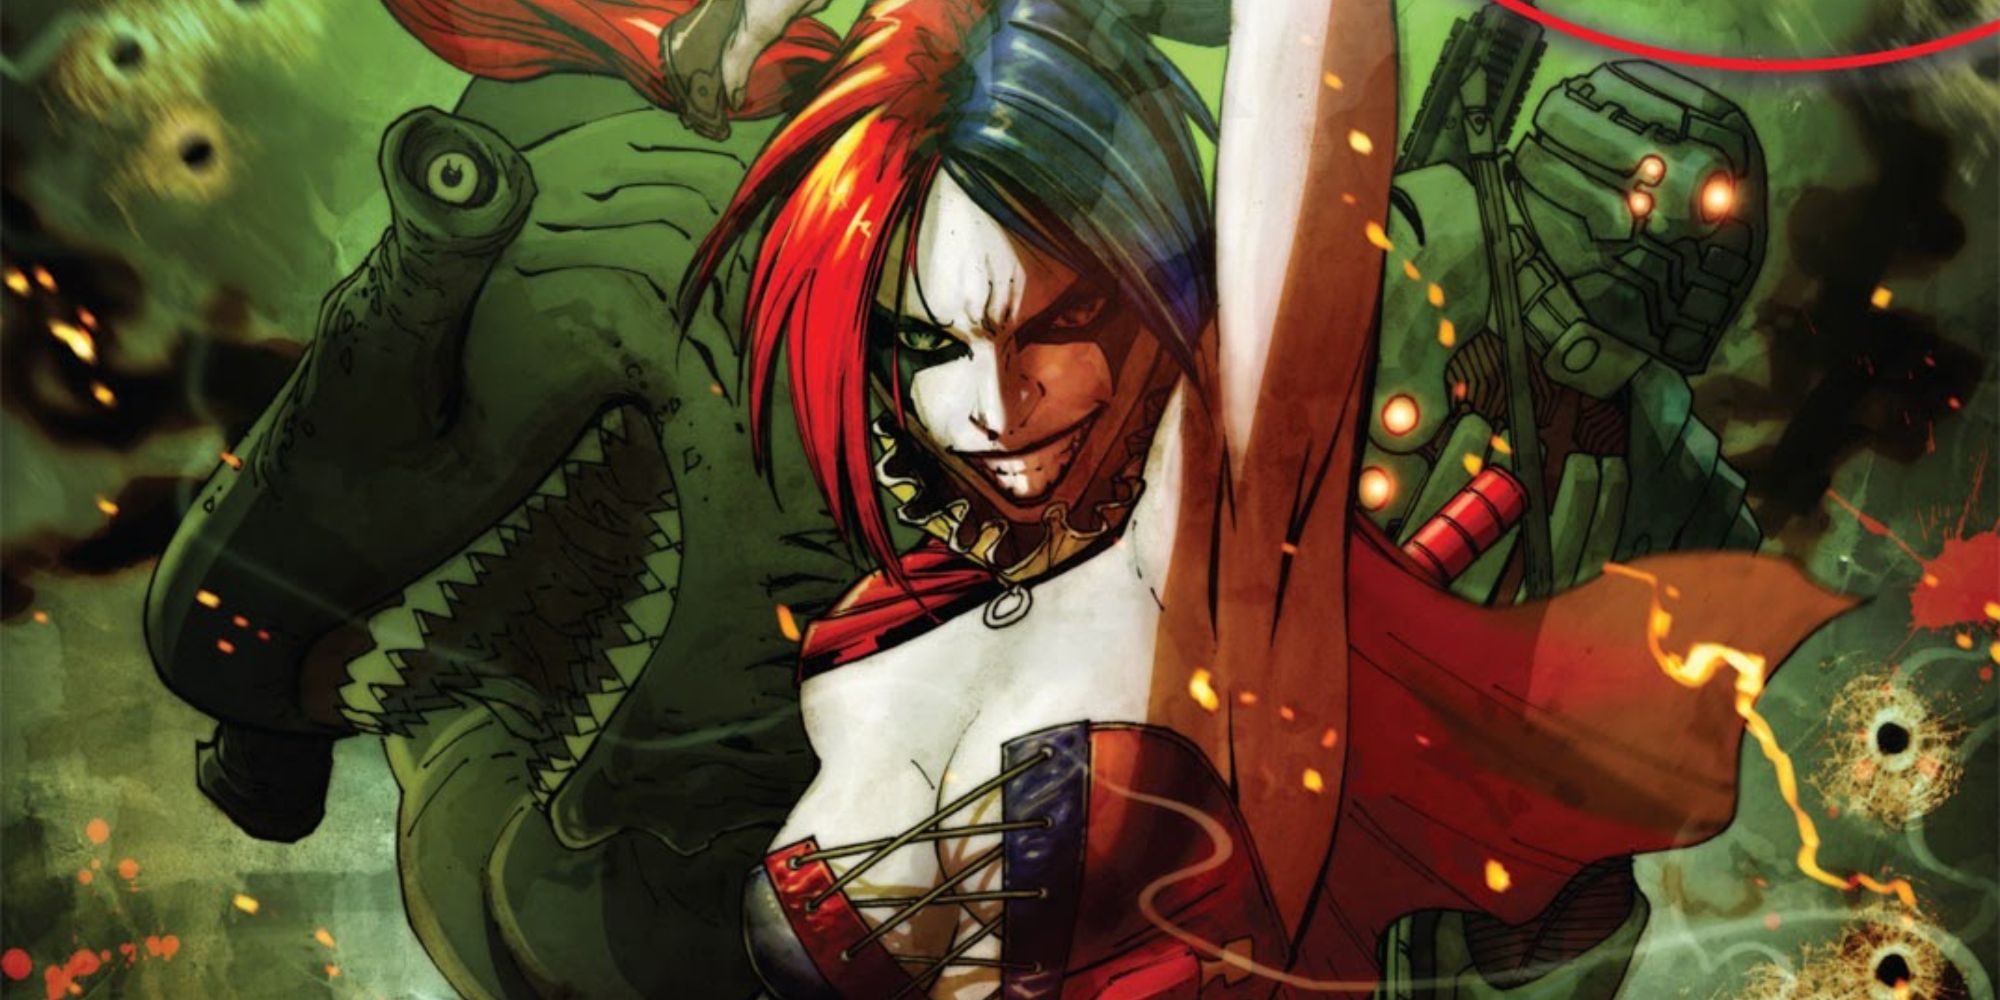 Harley Quinn joins the Suicide Squad in DC Comics.